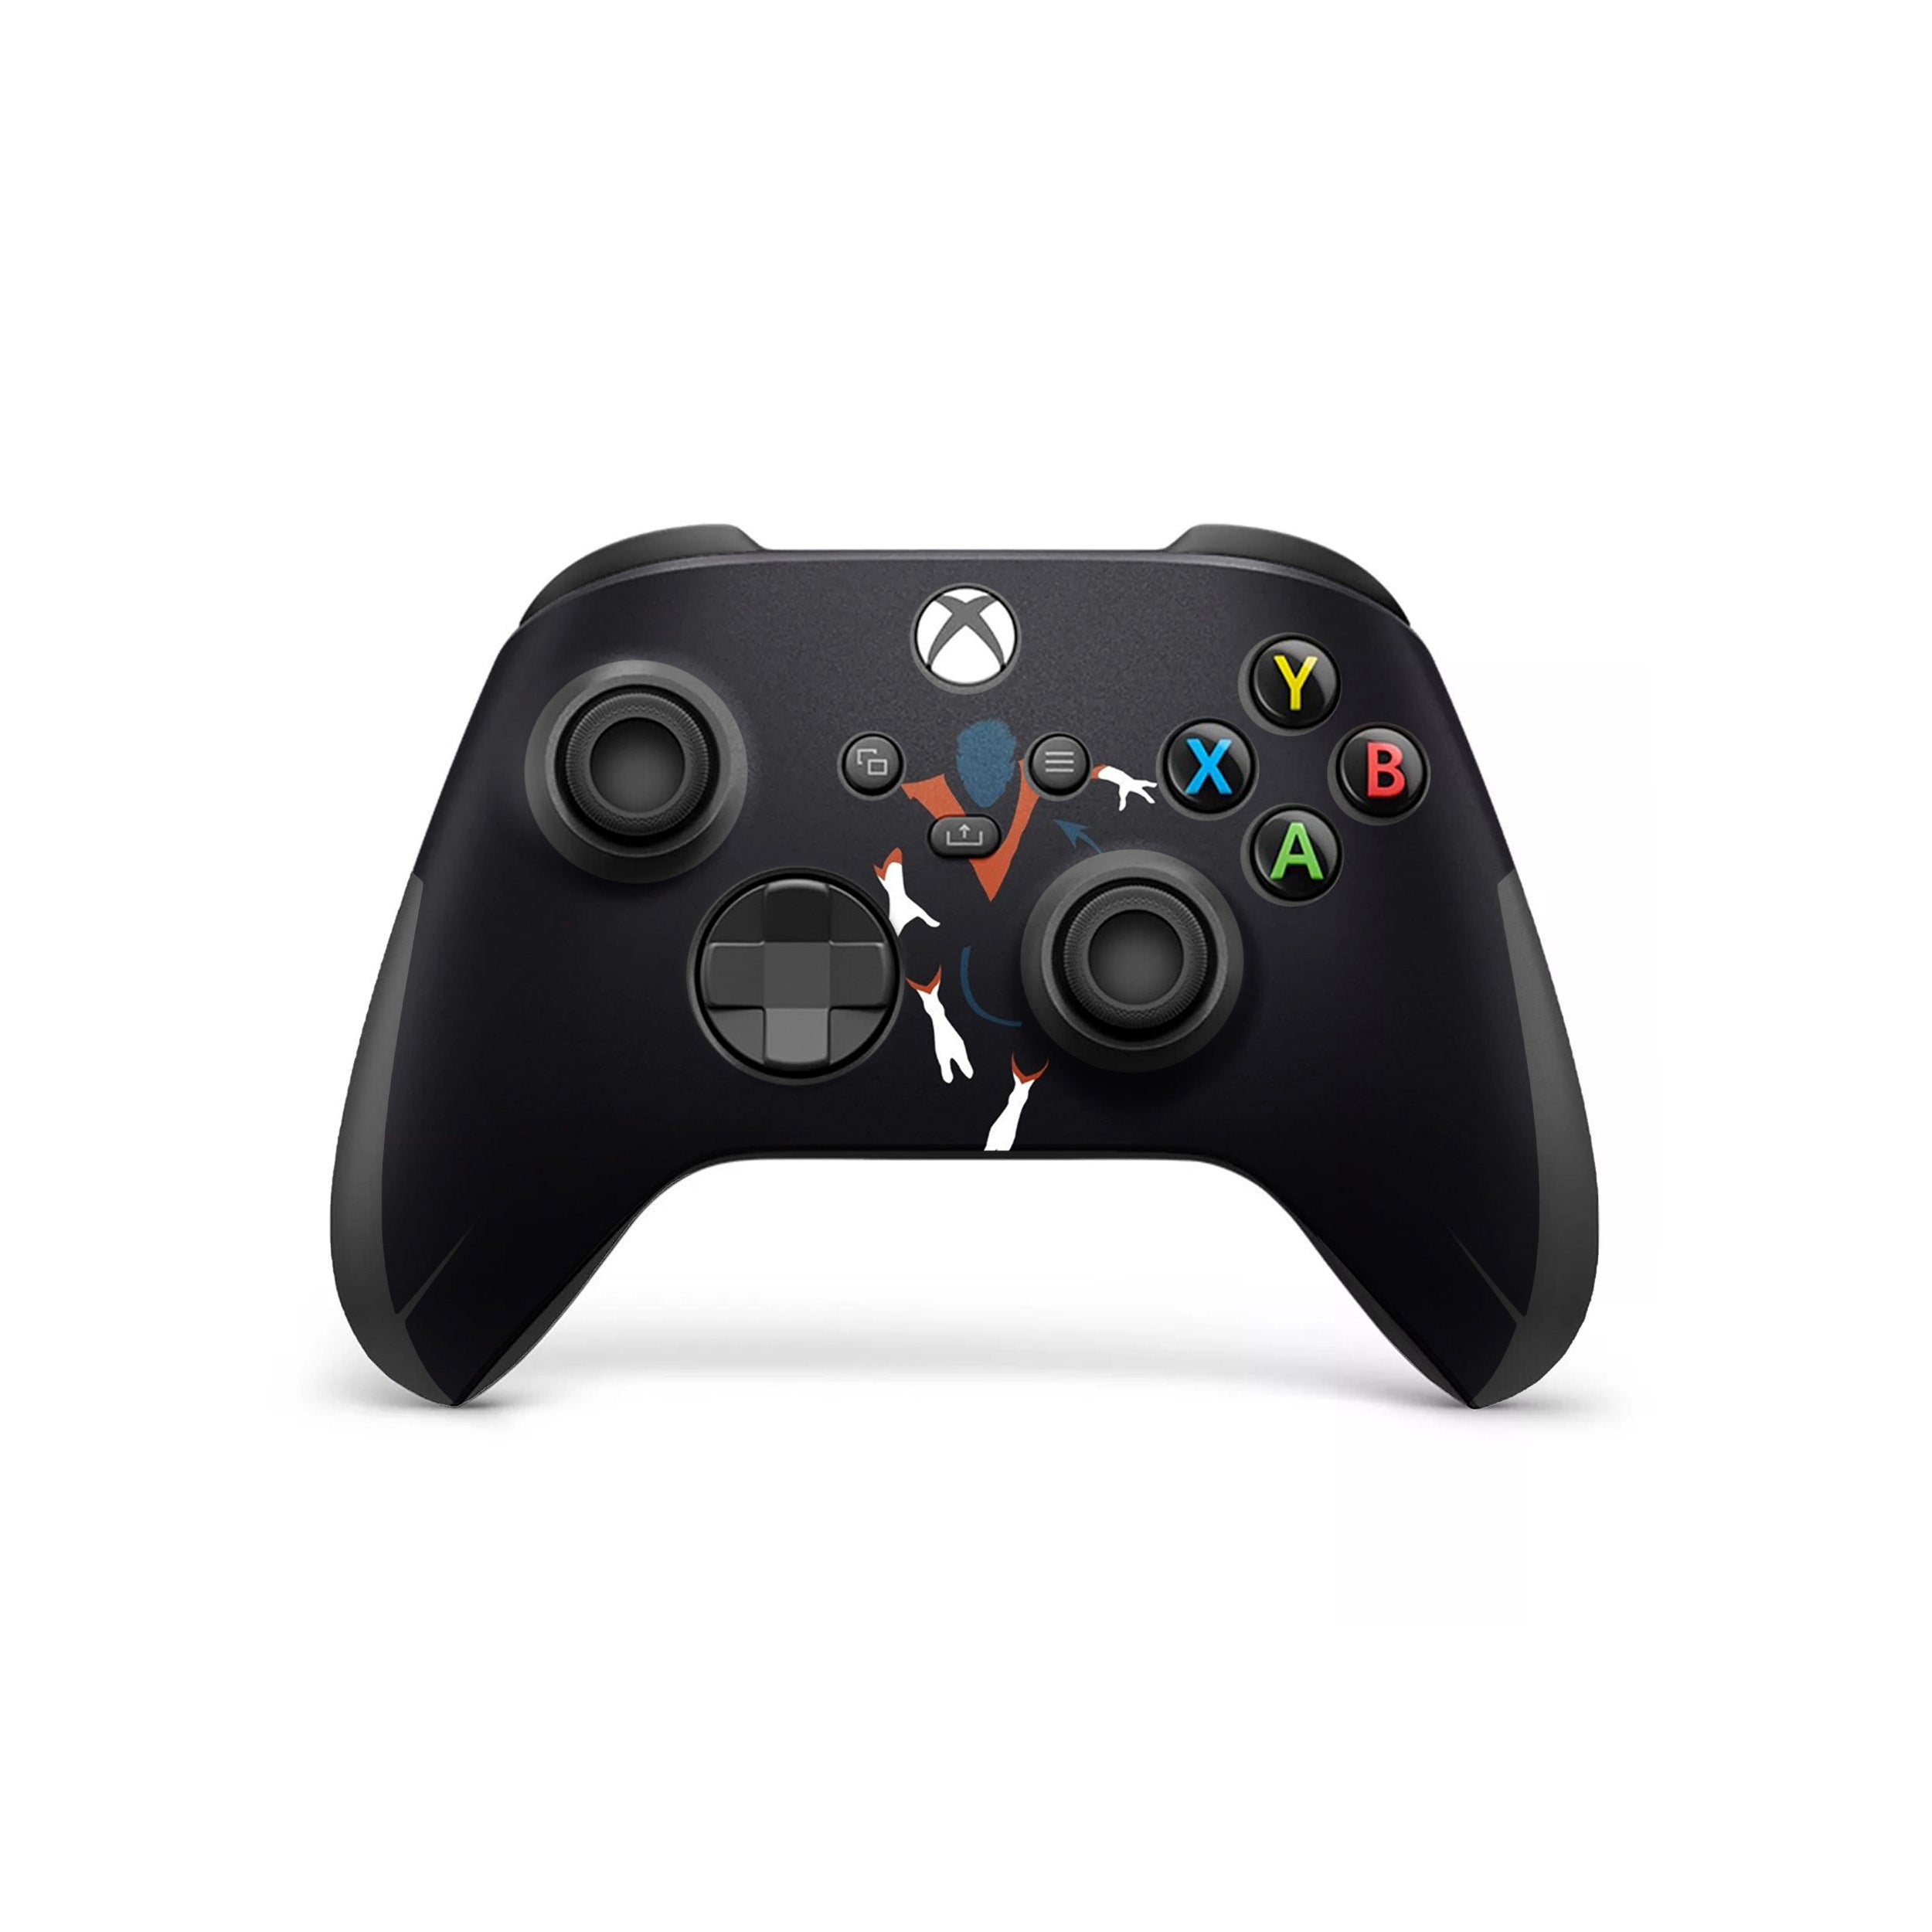 A video game skin featuring a Marvel X Men Nightcrawler design for the Xbox Wireless Controller.